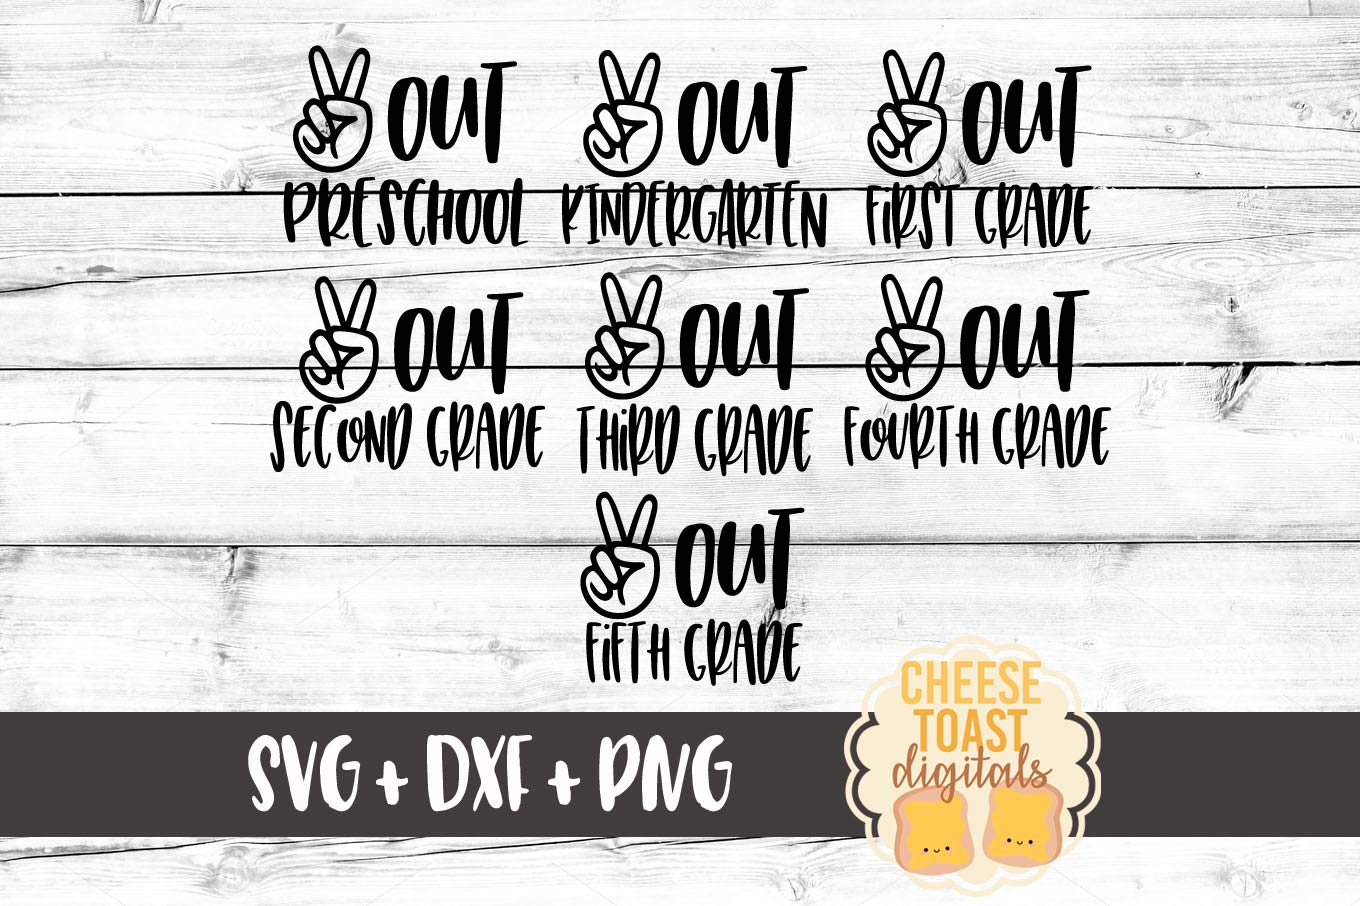 Download Peace Out School - End of School Bundle SVG PNG DXF Files